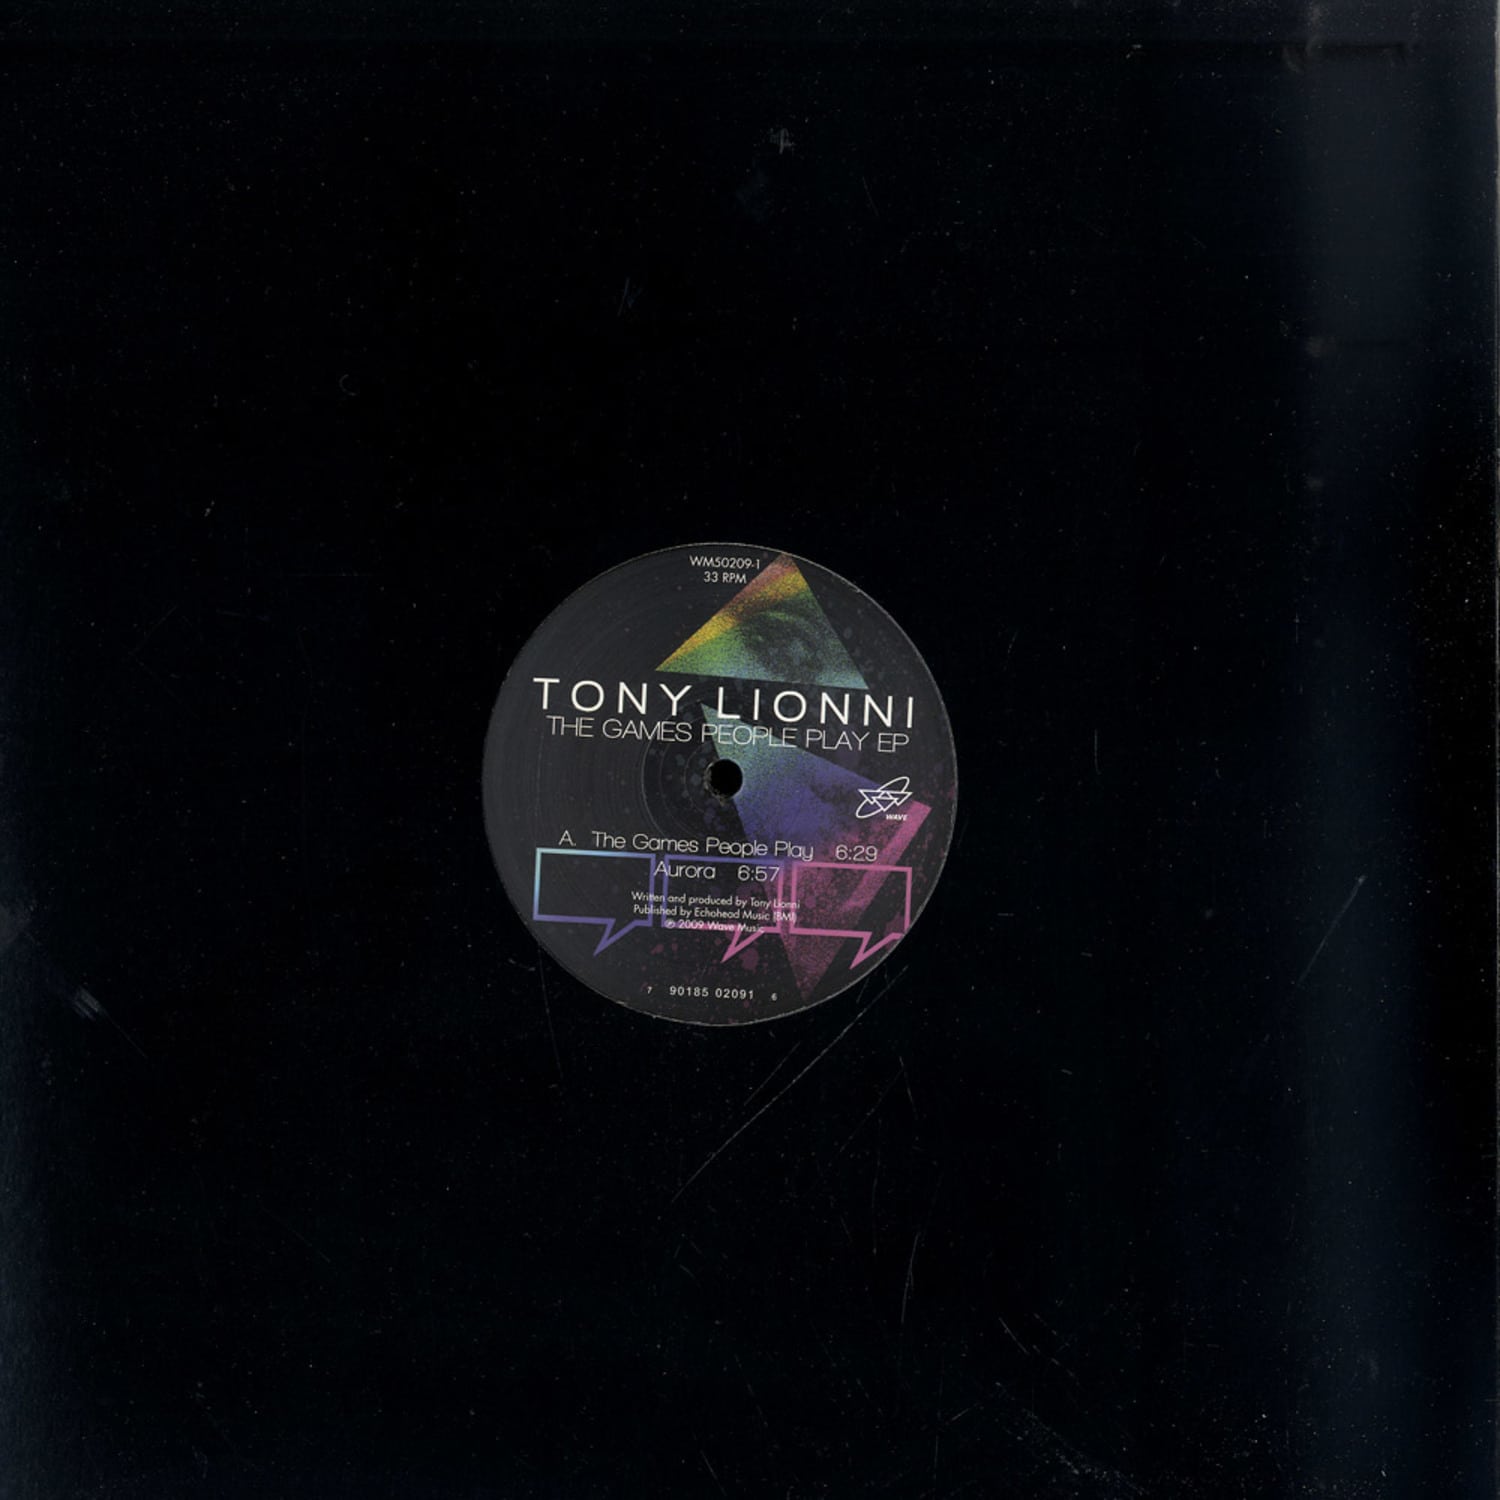 Tony Lionni - THE GAMES PEOPLE PLAY EP